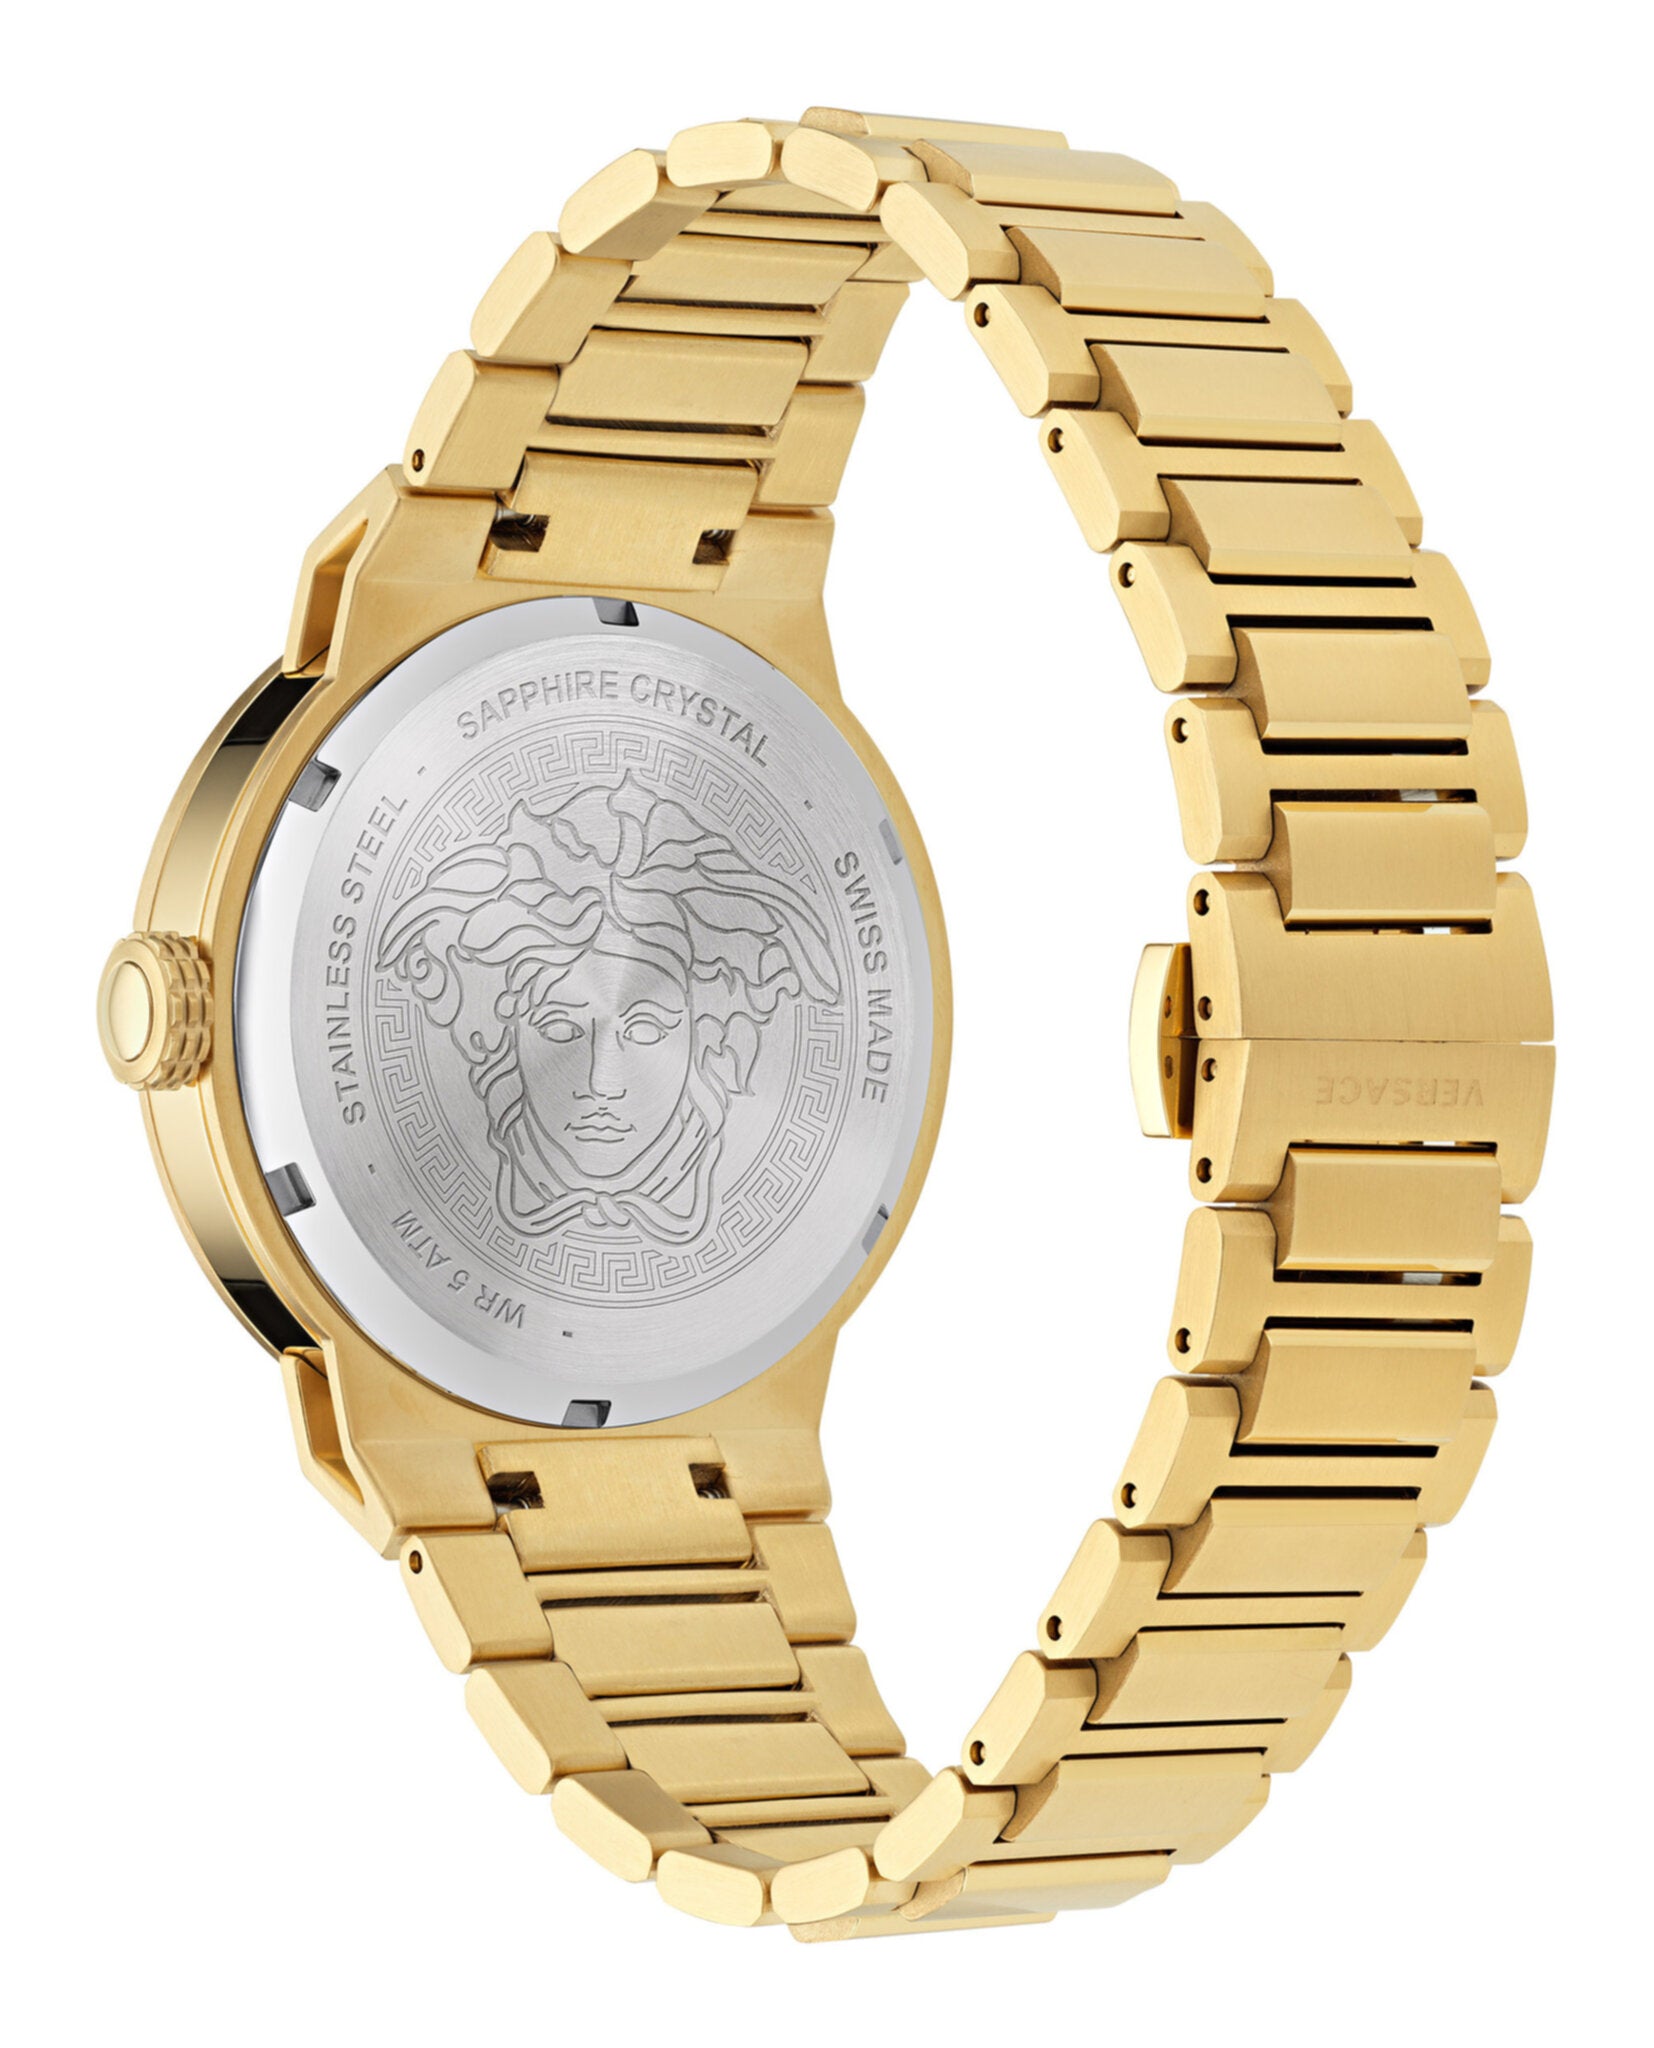 Versace Mens Medusa Infinite Watches | MadaLuxe Time – Madaluxe Time